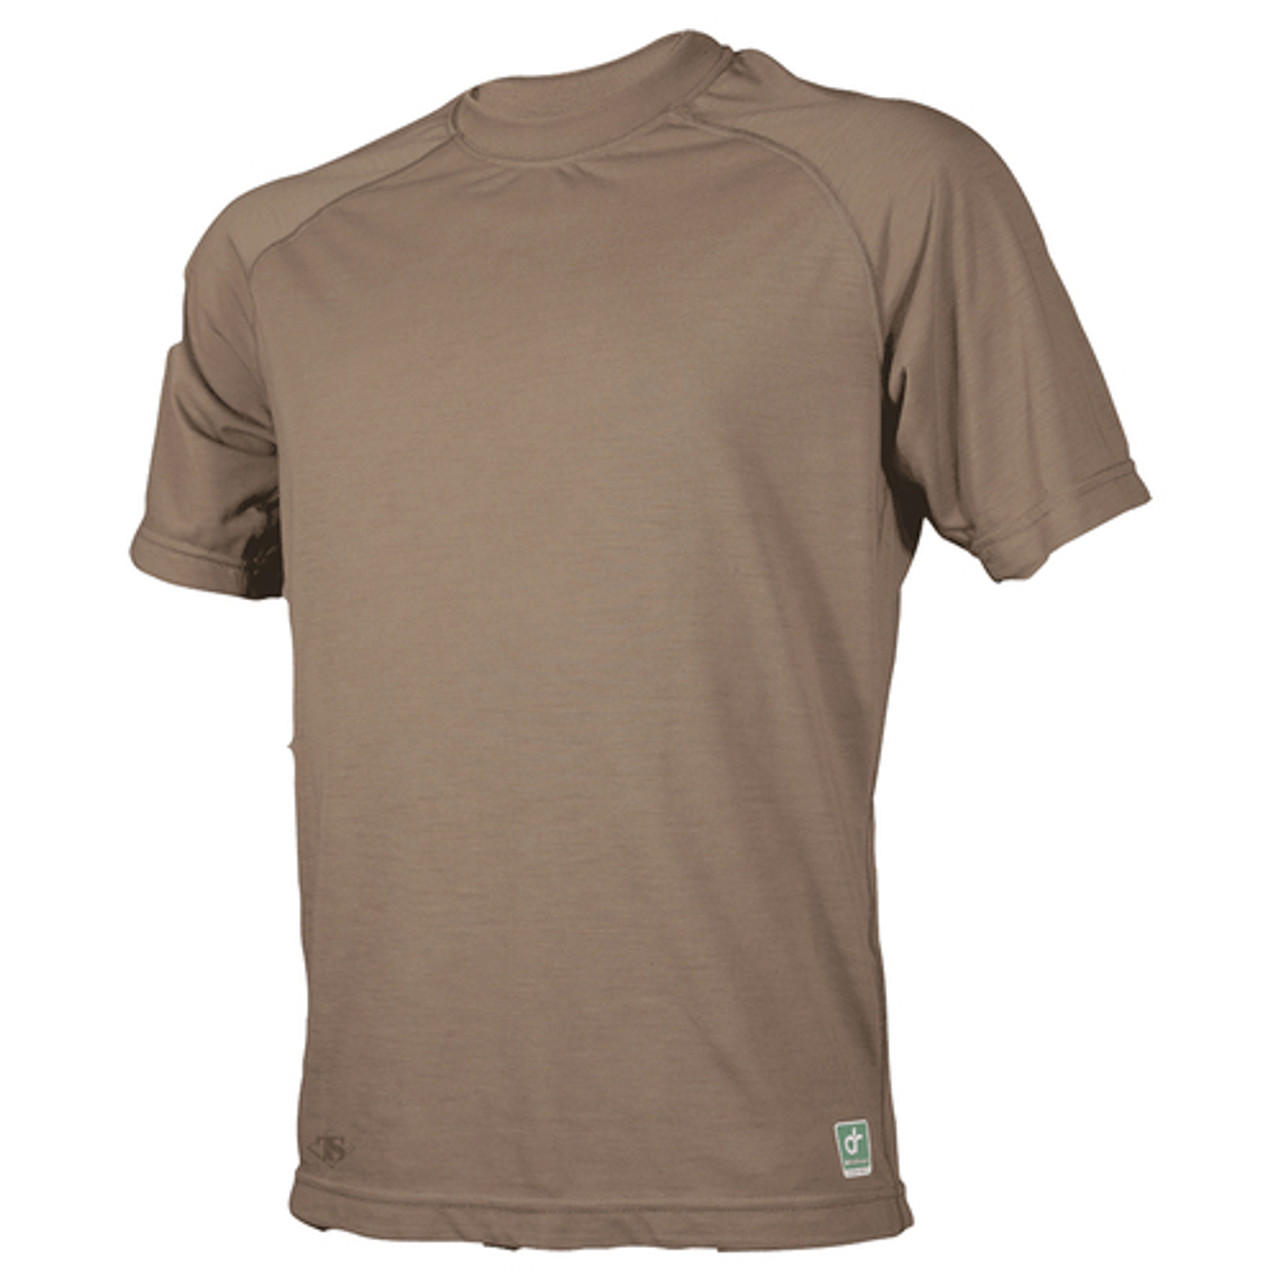 Tru-Spec TS-4612 DRIRELEASE Short Sleeve Tactical Baselayer T-Shirt, Uniform or Casual use, Crew Neck Collar,  Polyester/Cotton, Athletic Fit